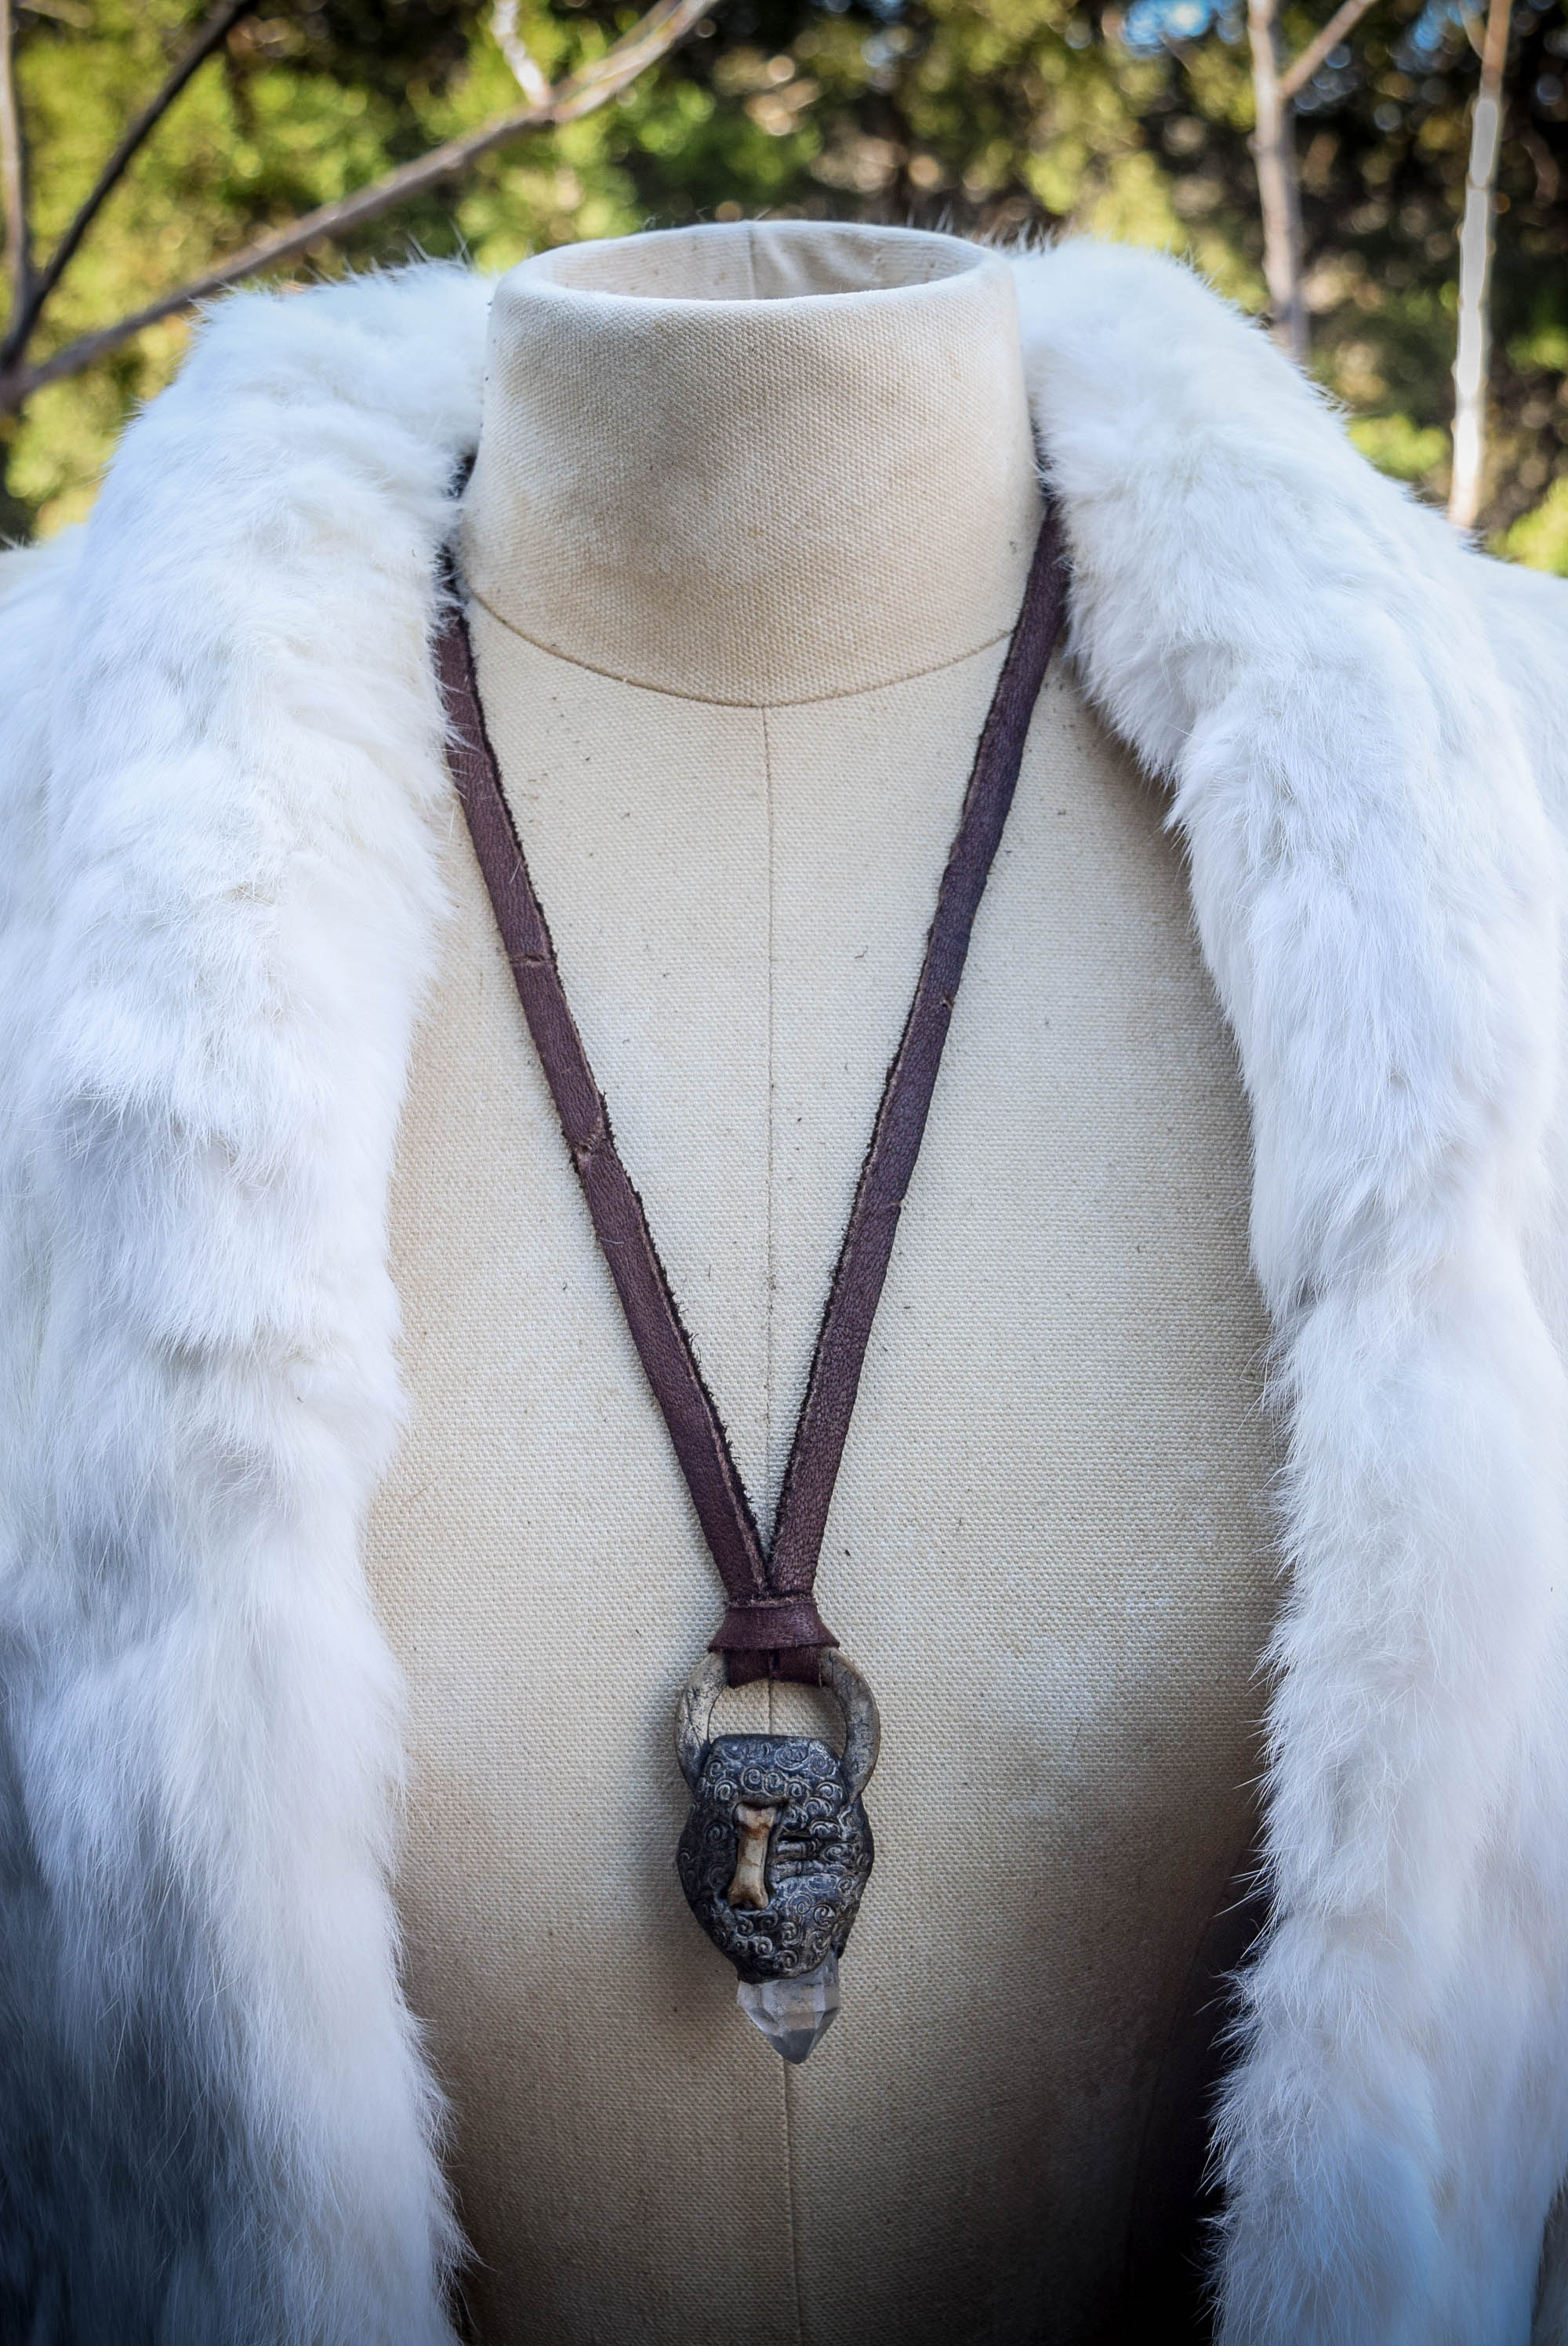 Wild Wanderer - A Necklace for Strength, Clarity and Emotional Stamina